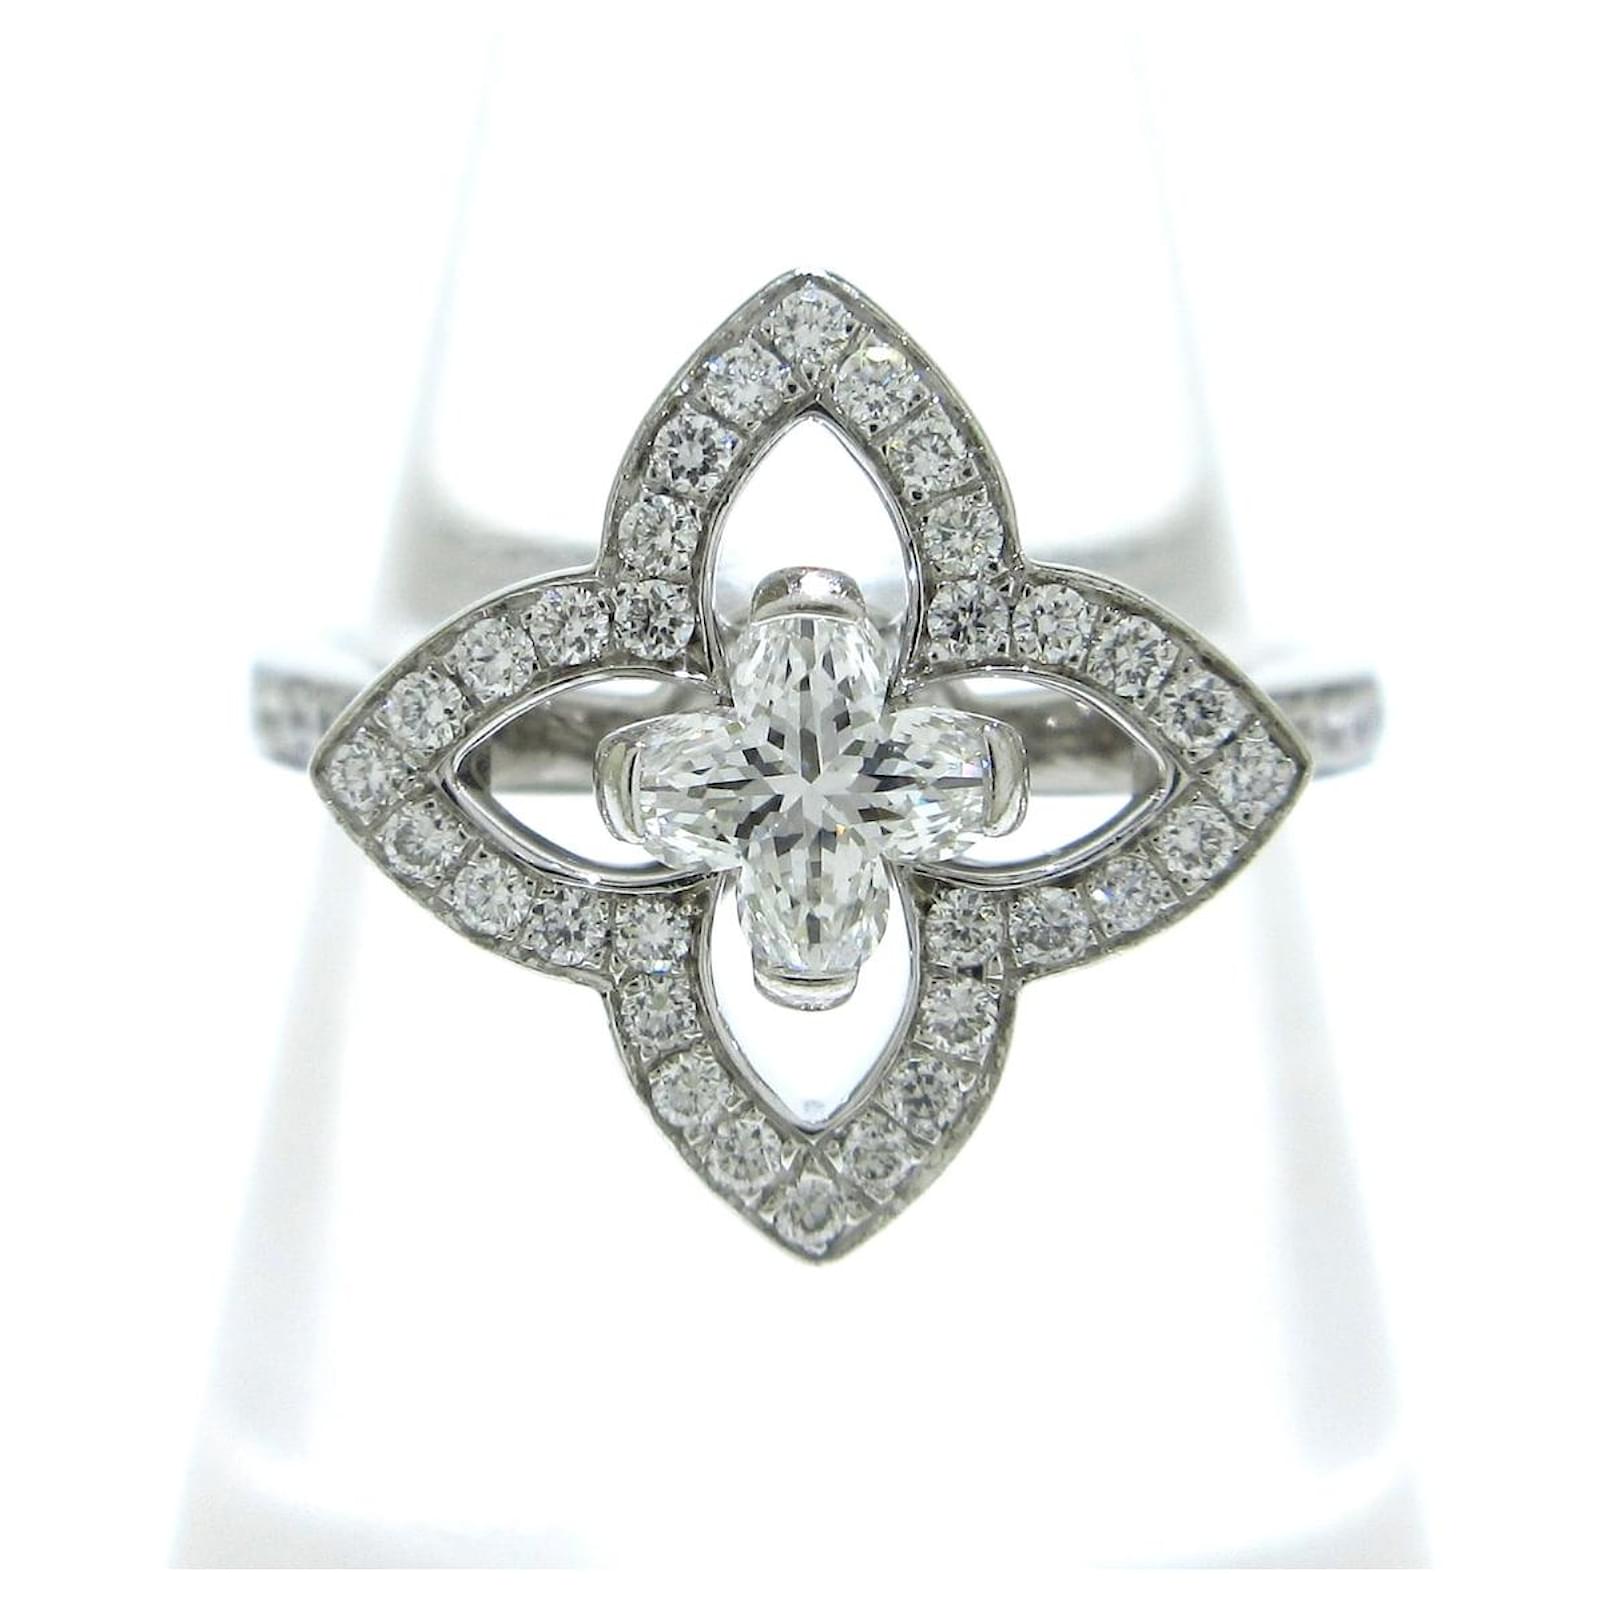 White Gold Ring Louis Vuitton Silver In White Gold